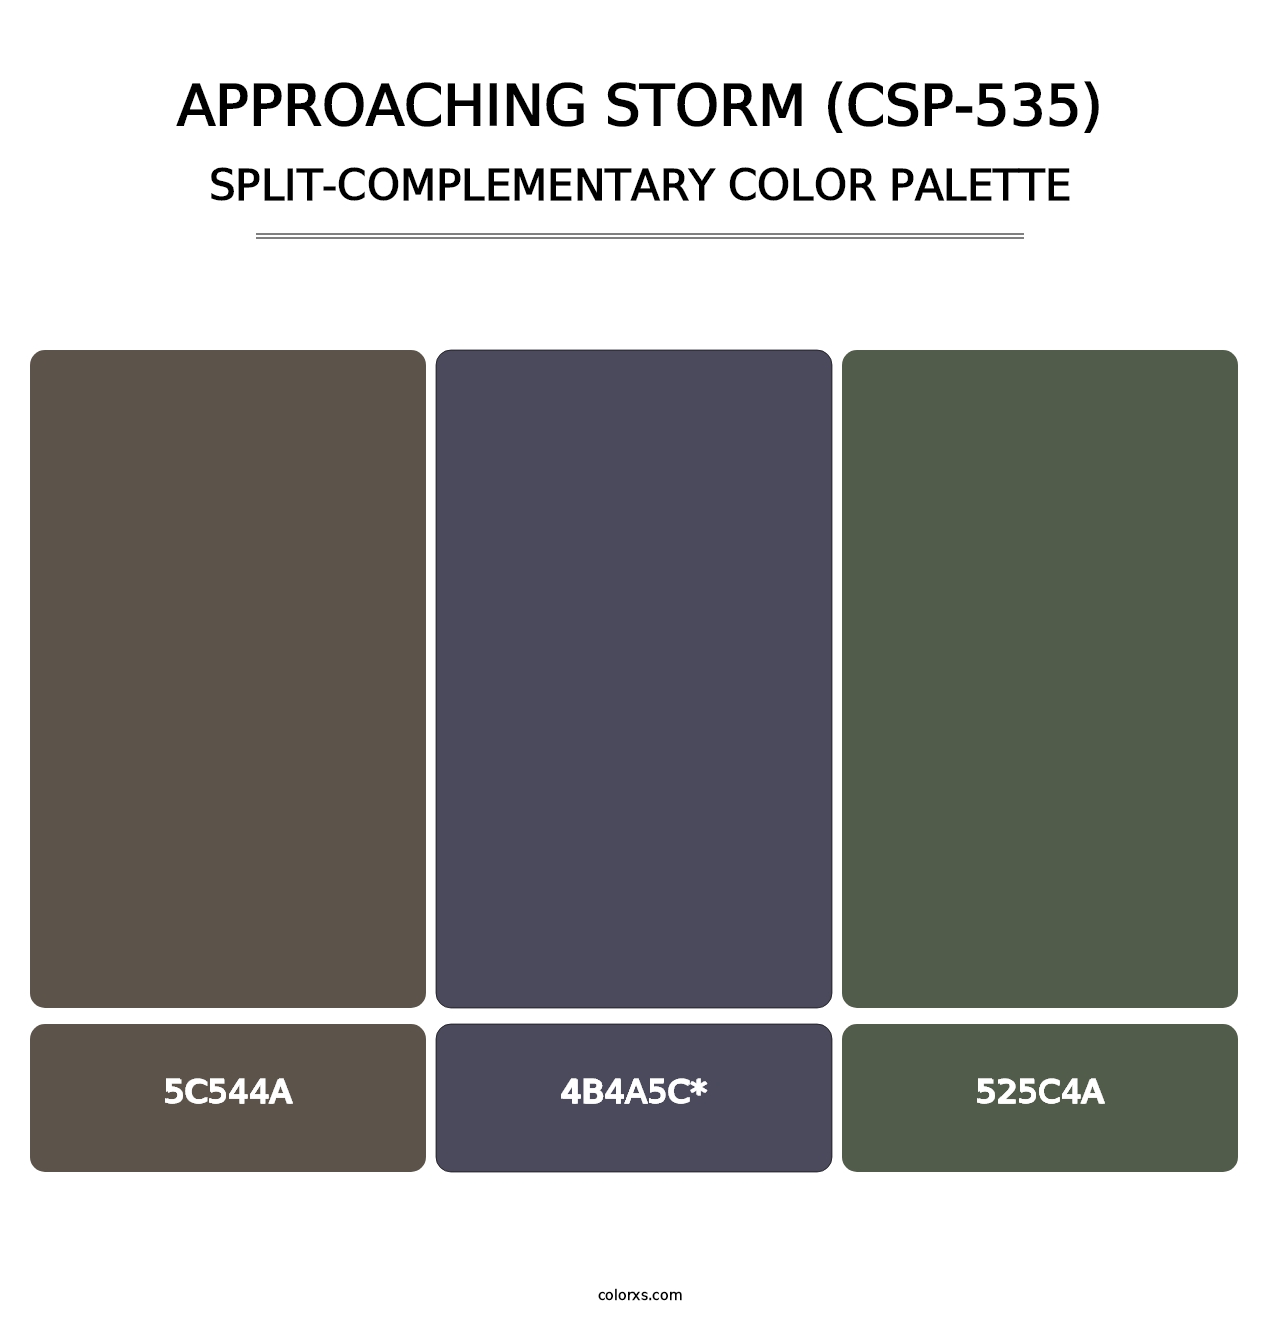 Approaching Storm (CSP-535) - Split-Complementary Color Palette